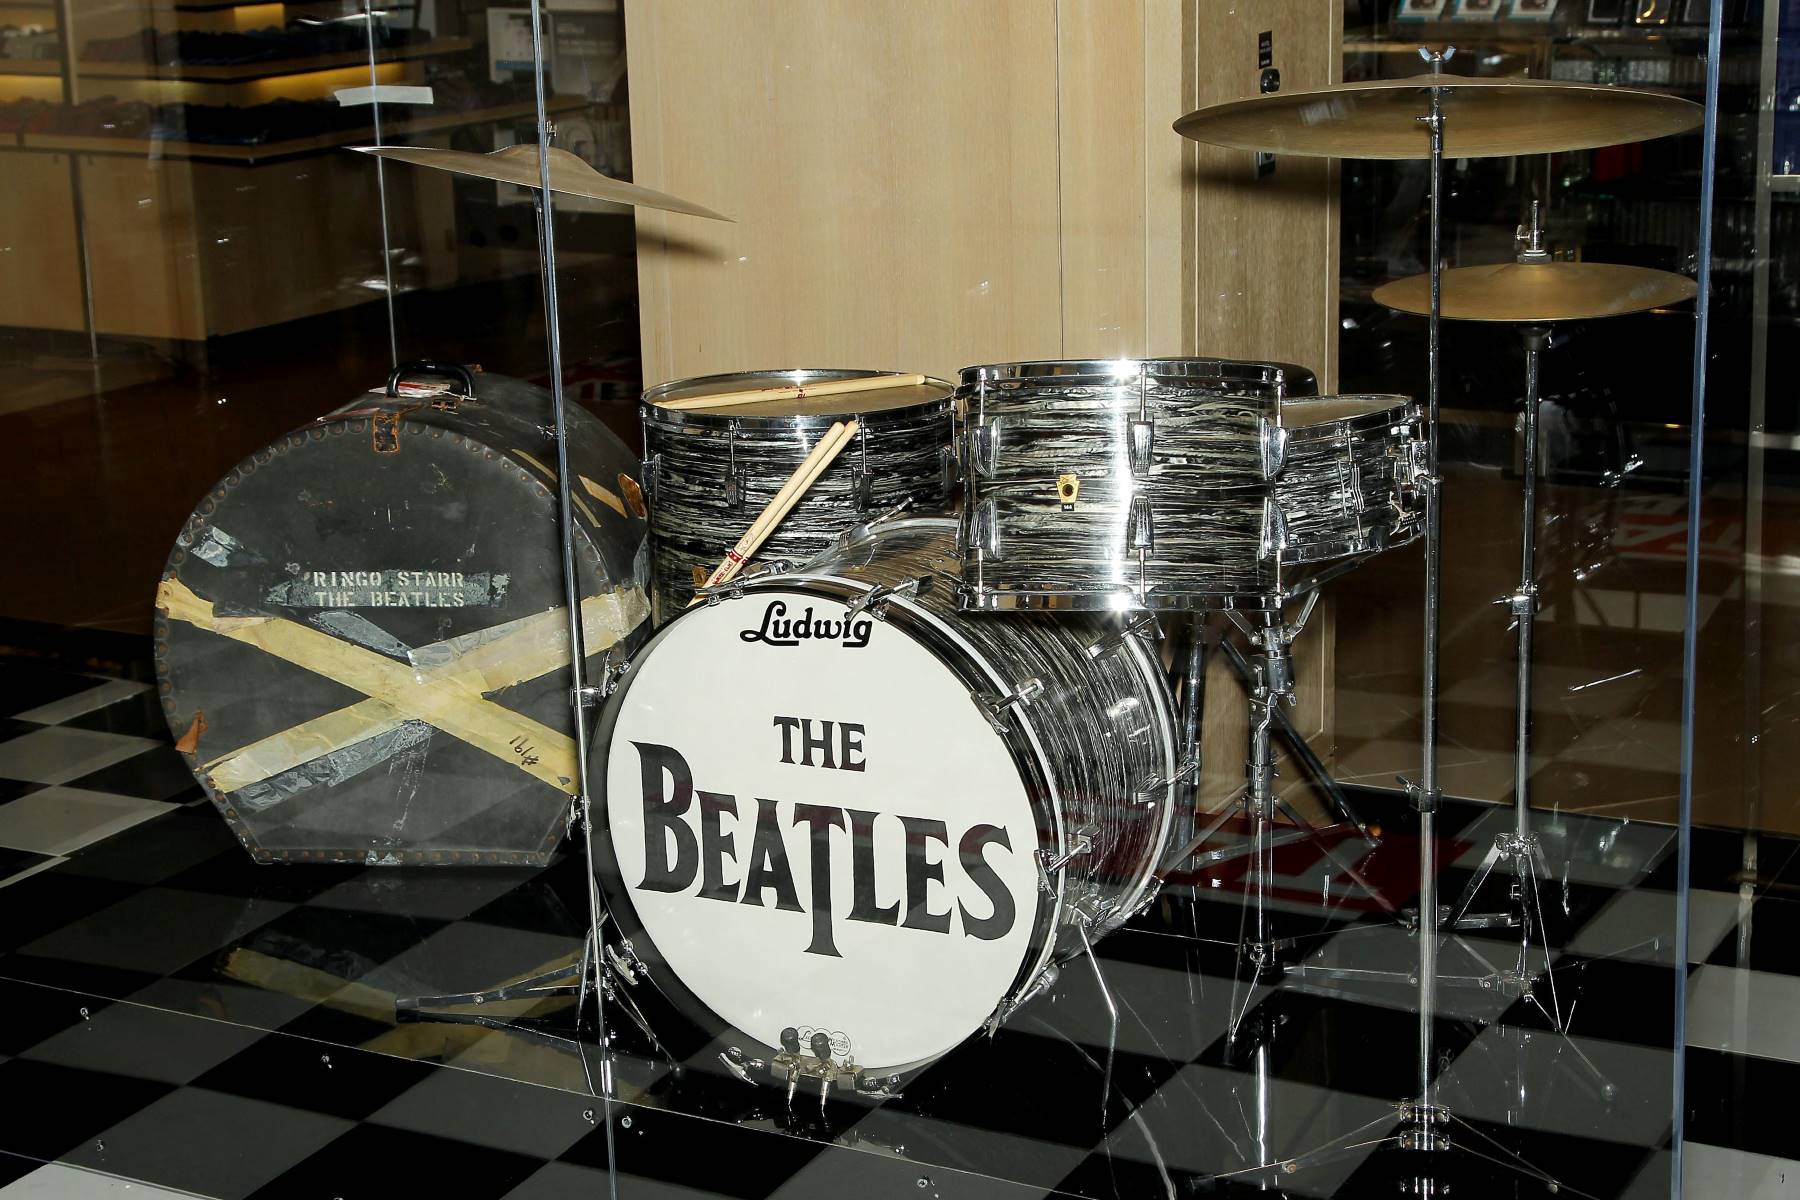 What Drums Did Ringo Starr Play